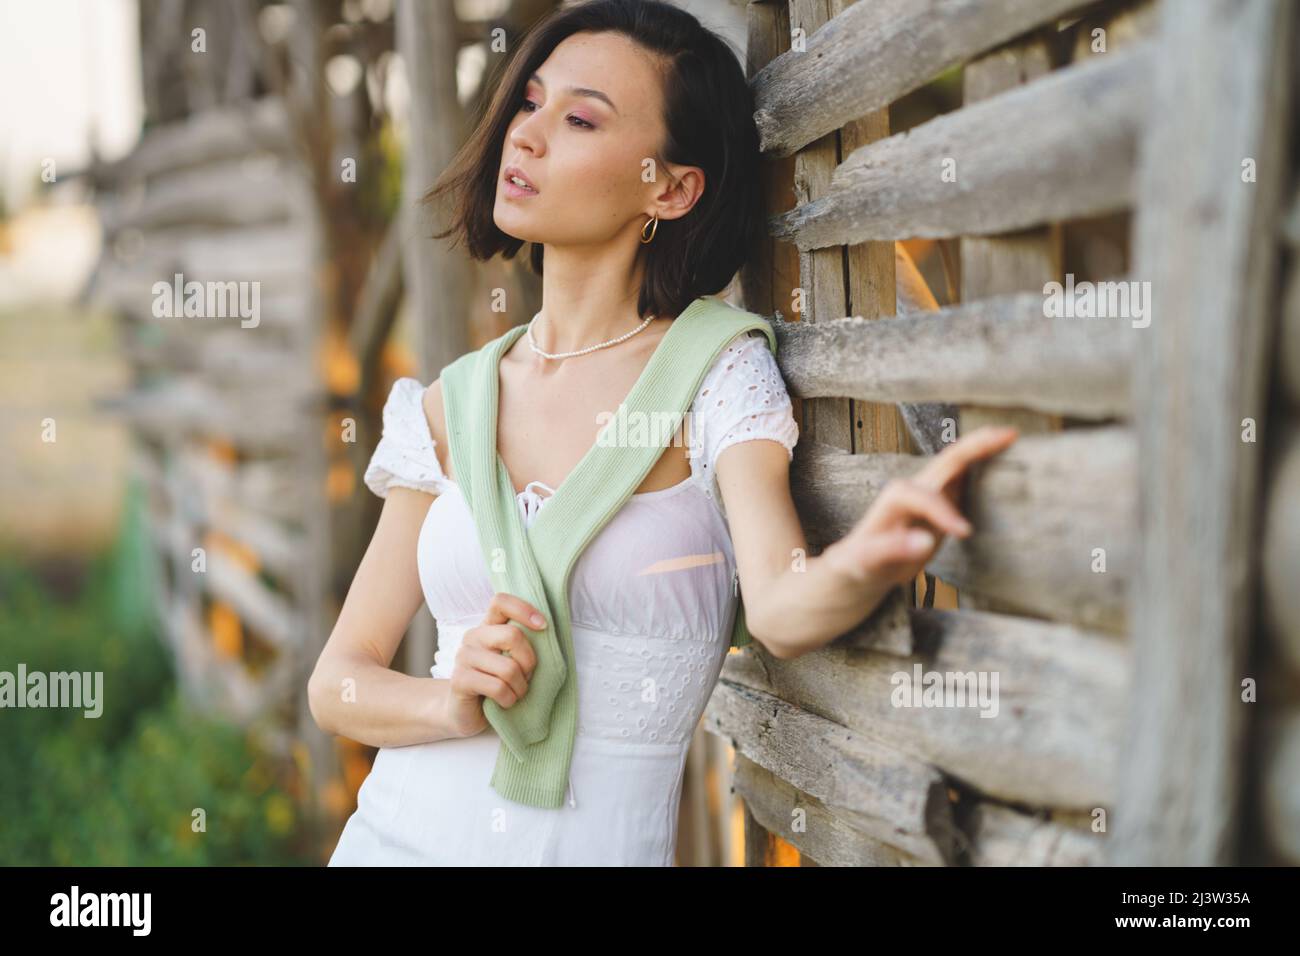 Asian woman, posing near a tobacco drying shed, wearing a white dress and green wellies. Stock Photo